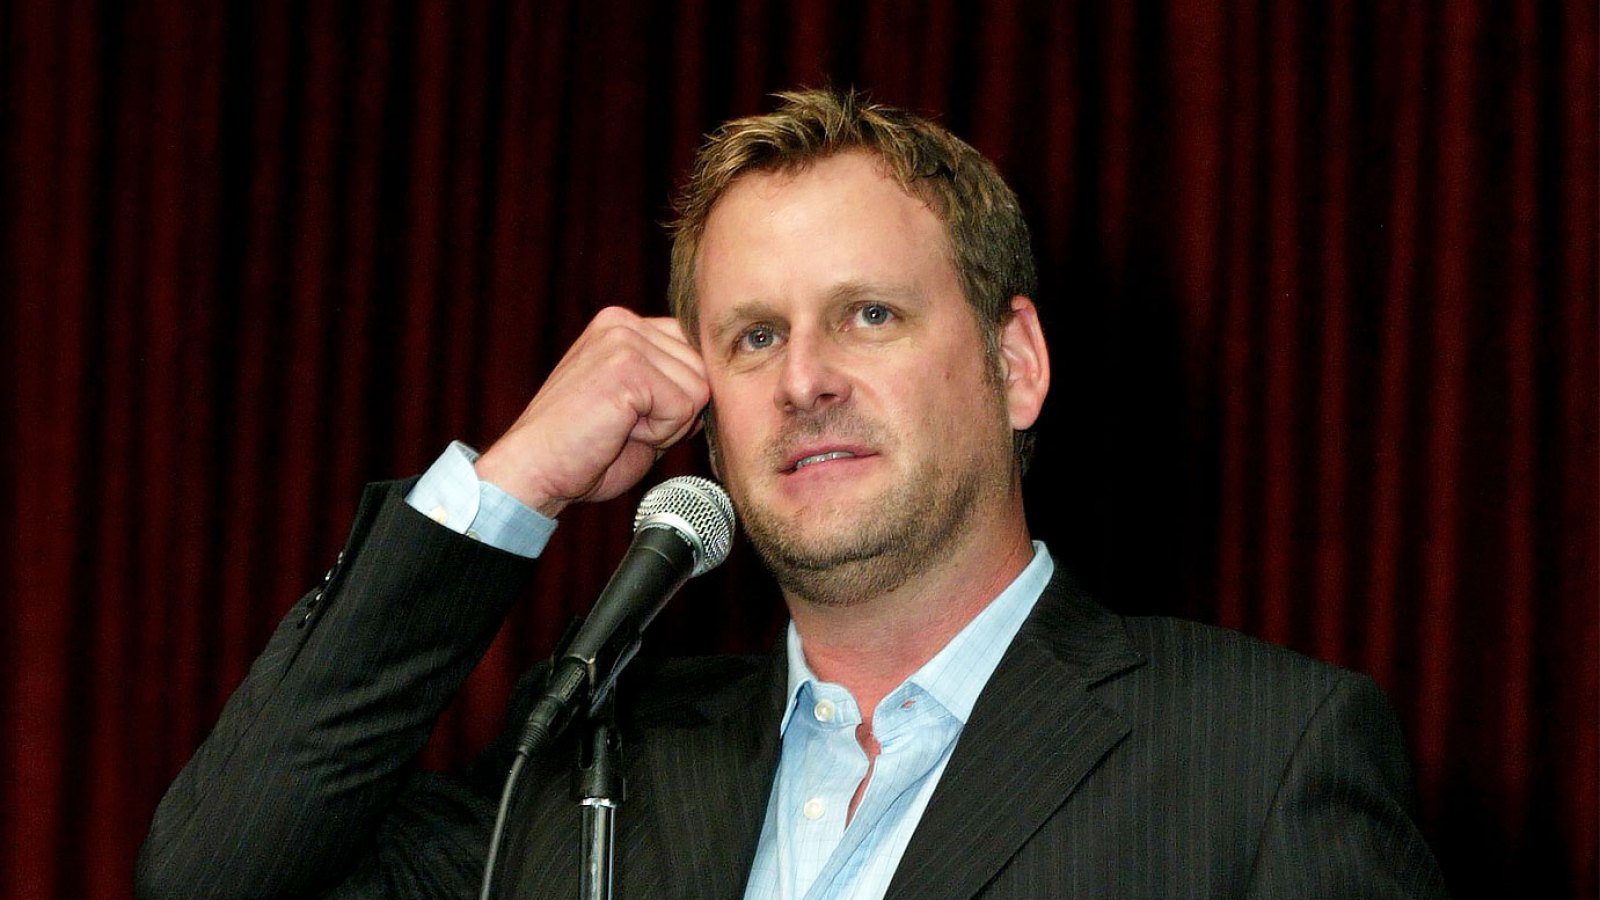 Dave-Coulier-Ex-Girlfriend-Alanis-Morissettes-You-Oughta-Know-Isnt-Necessarily-About-Me-Dave-Coulier-2006